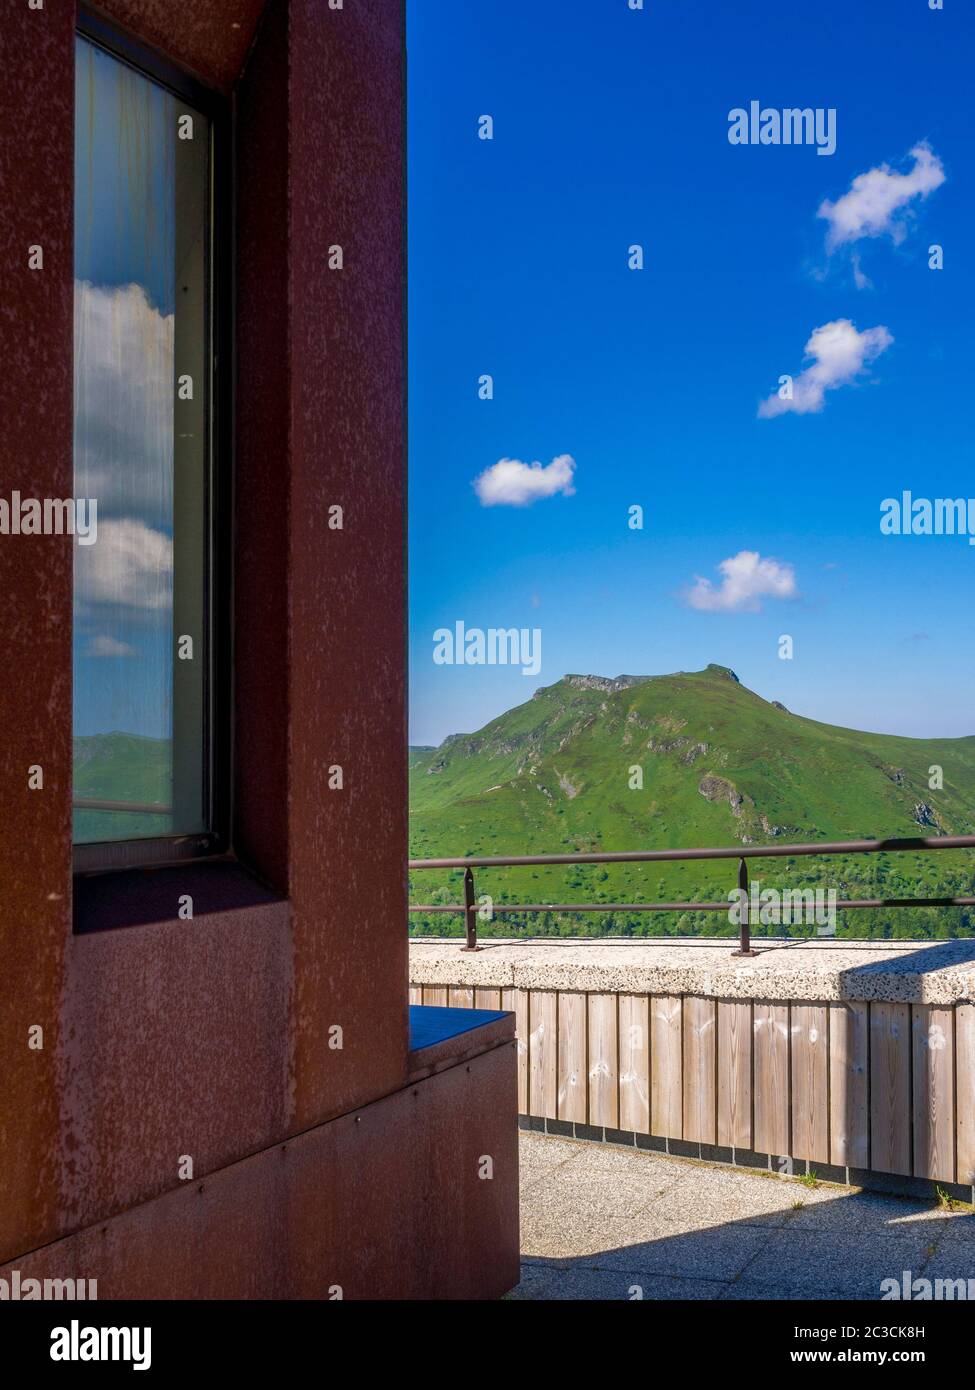 Window and mountain, Puy Mary, Cantal, Auvergne-Rhone-Alpes, France Stock Photo